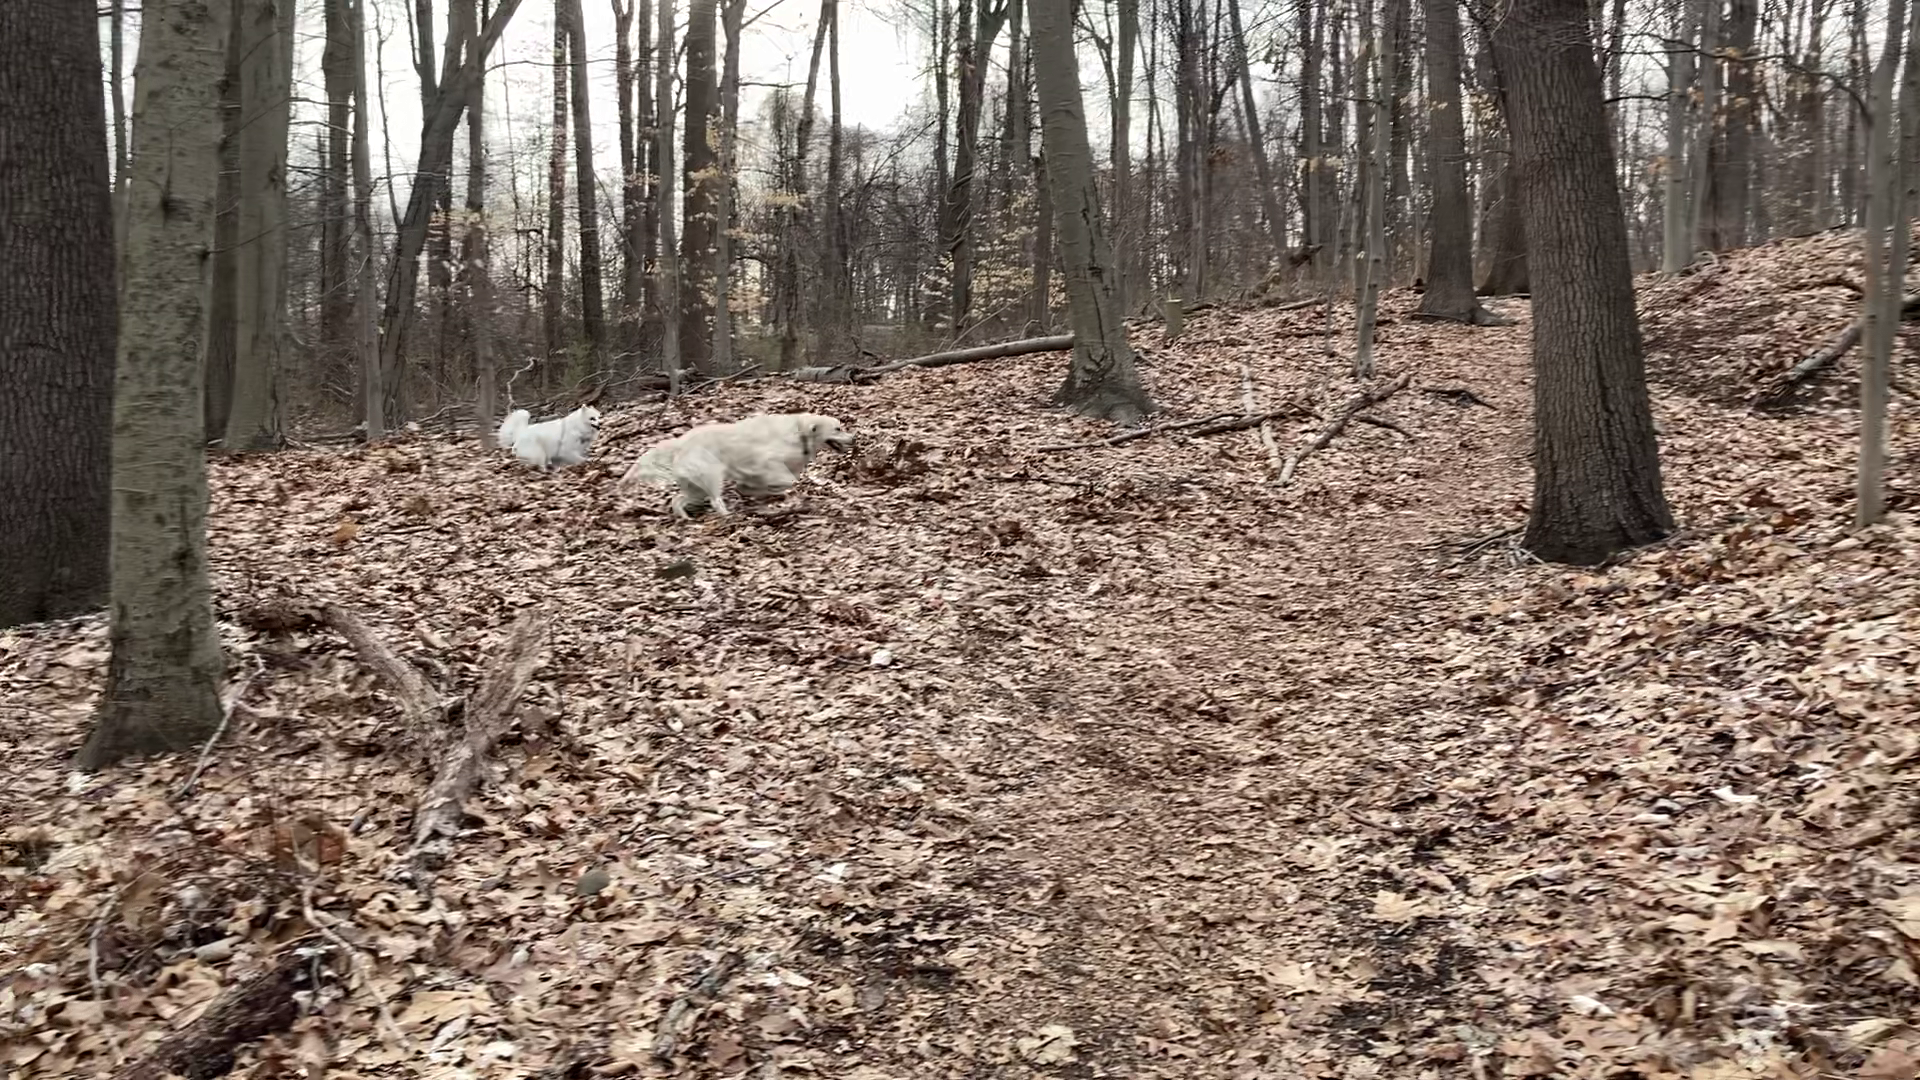 North and Tucker running through the woods.